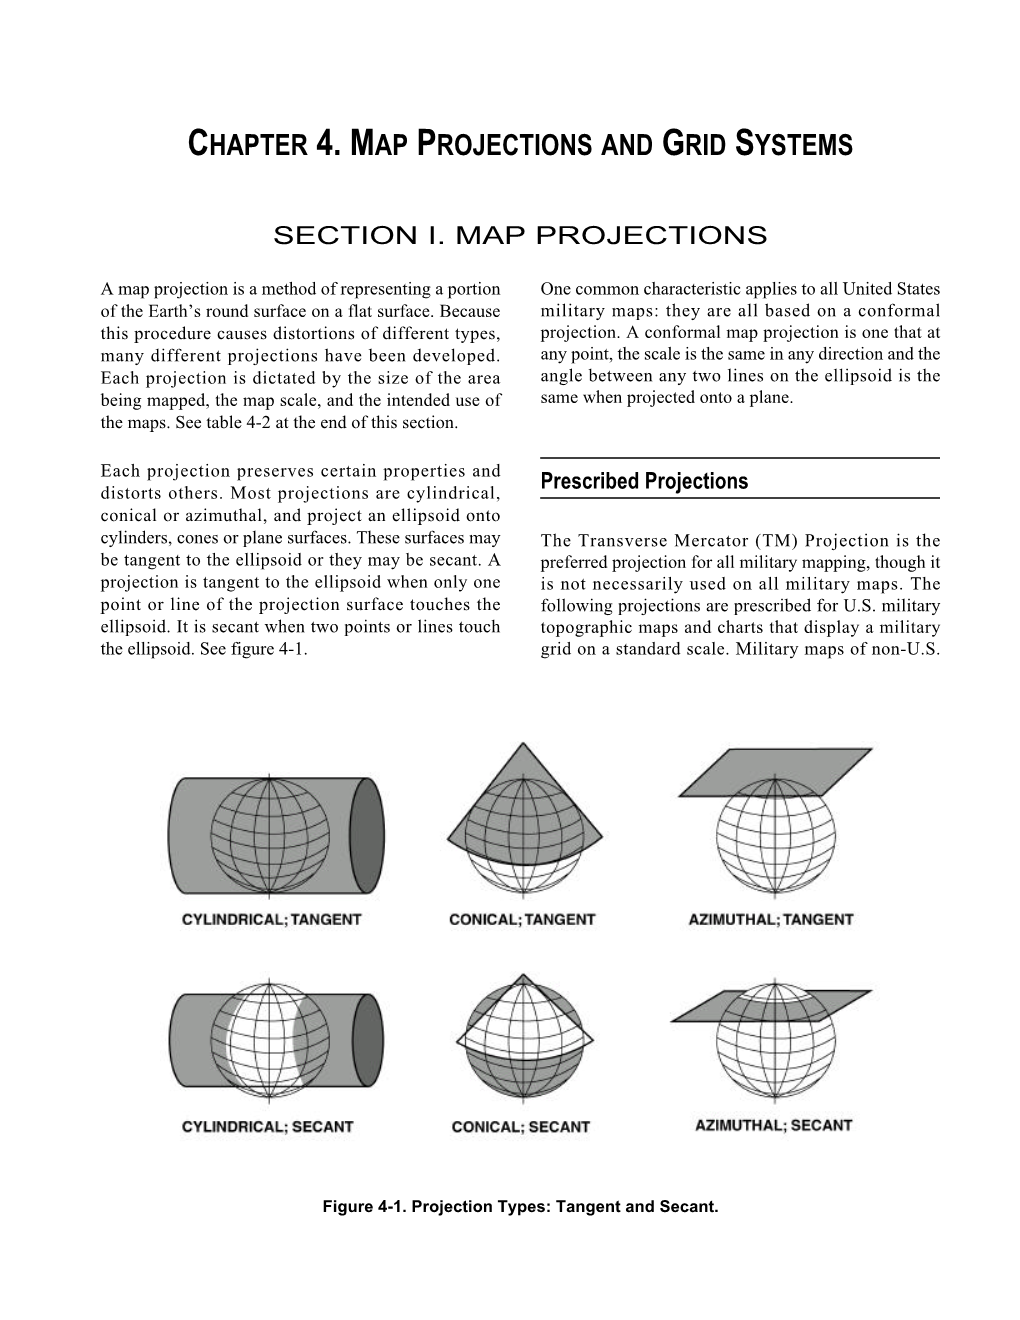 MCWP 3-16.7 Chapter 4: Map Projections and Grid Systems